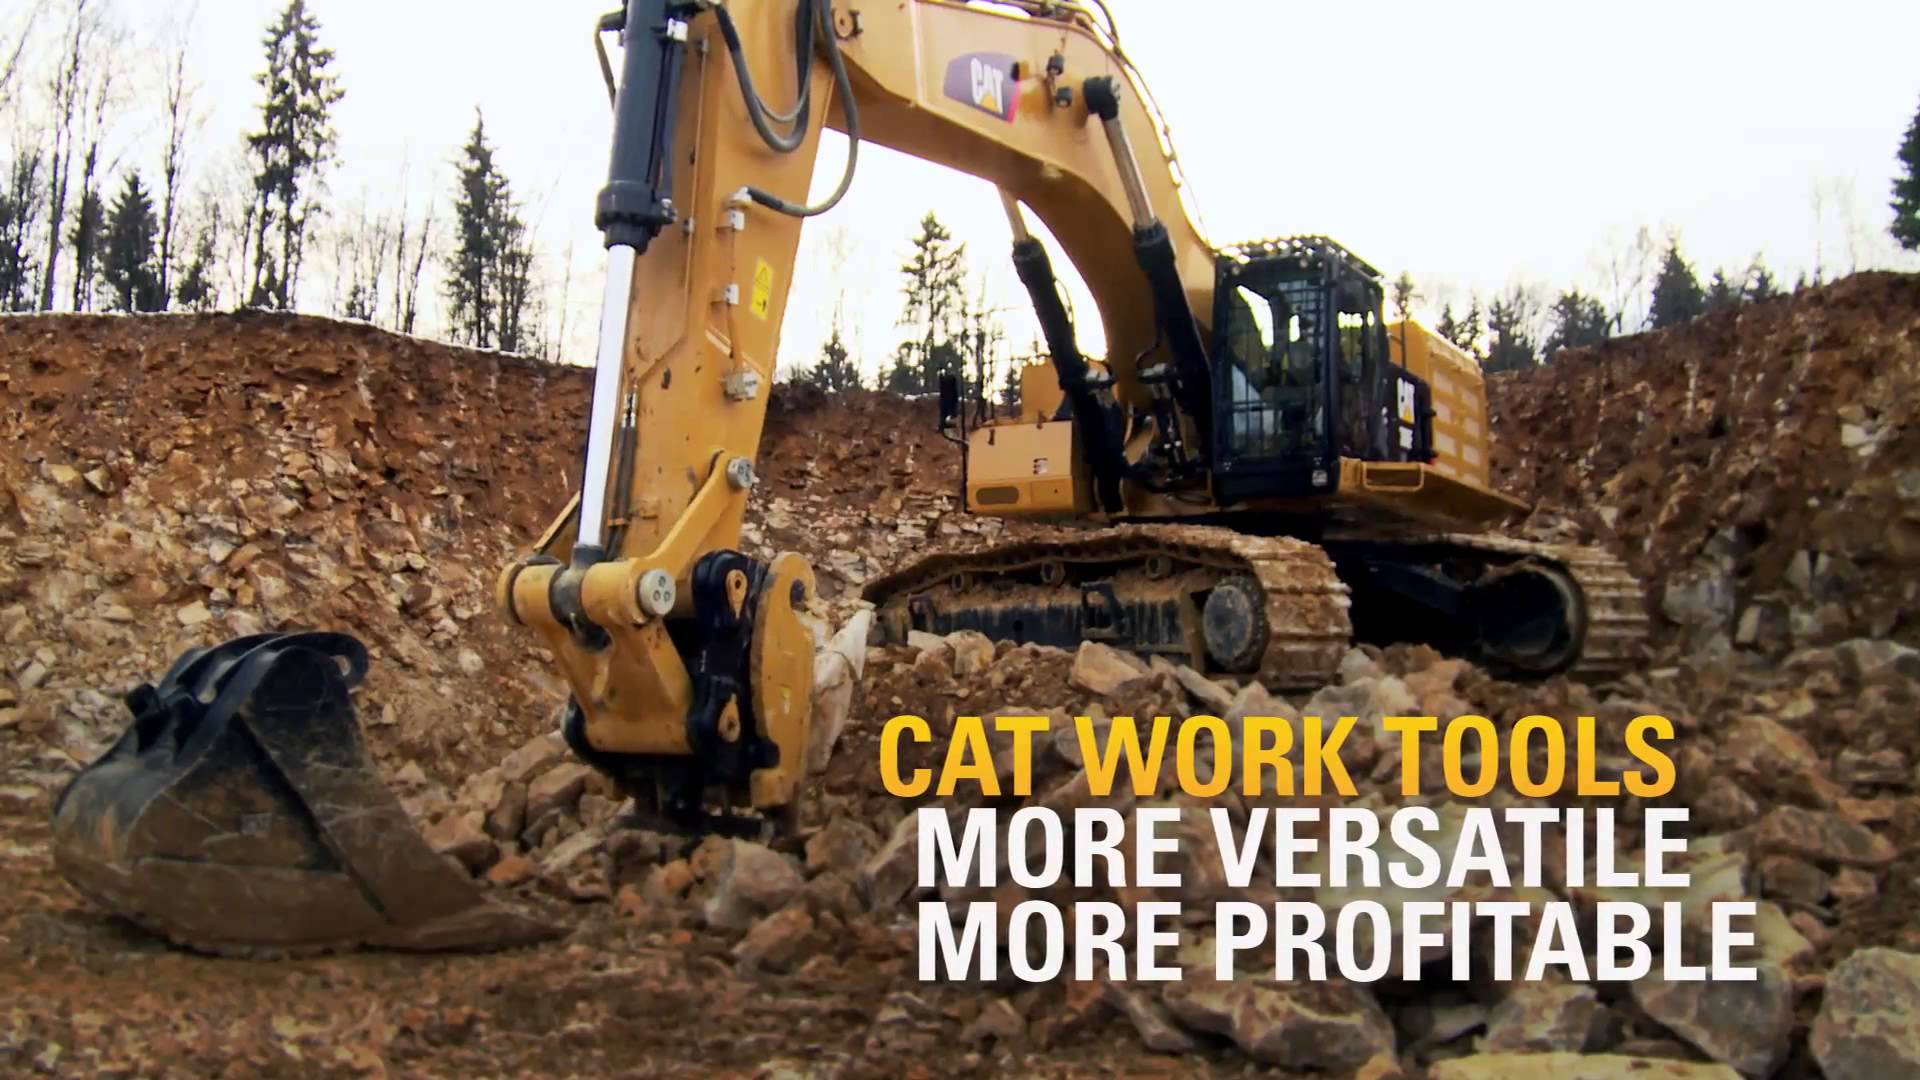 Cat® 390F Excavator at Work Digging and Loading - YouTube